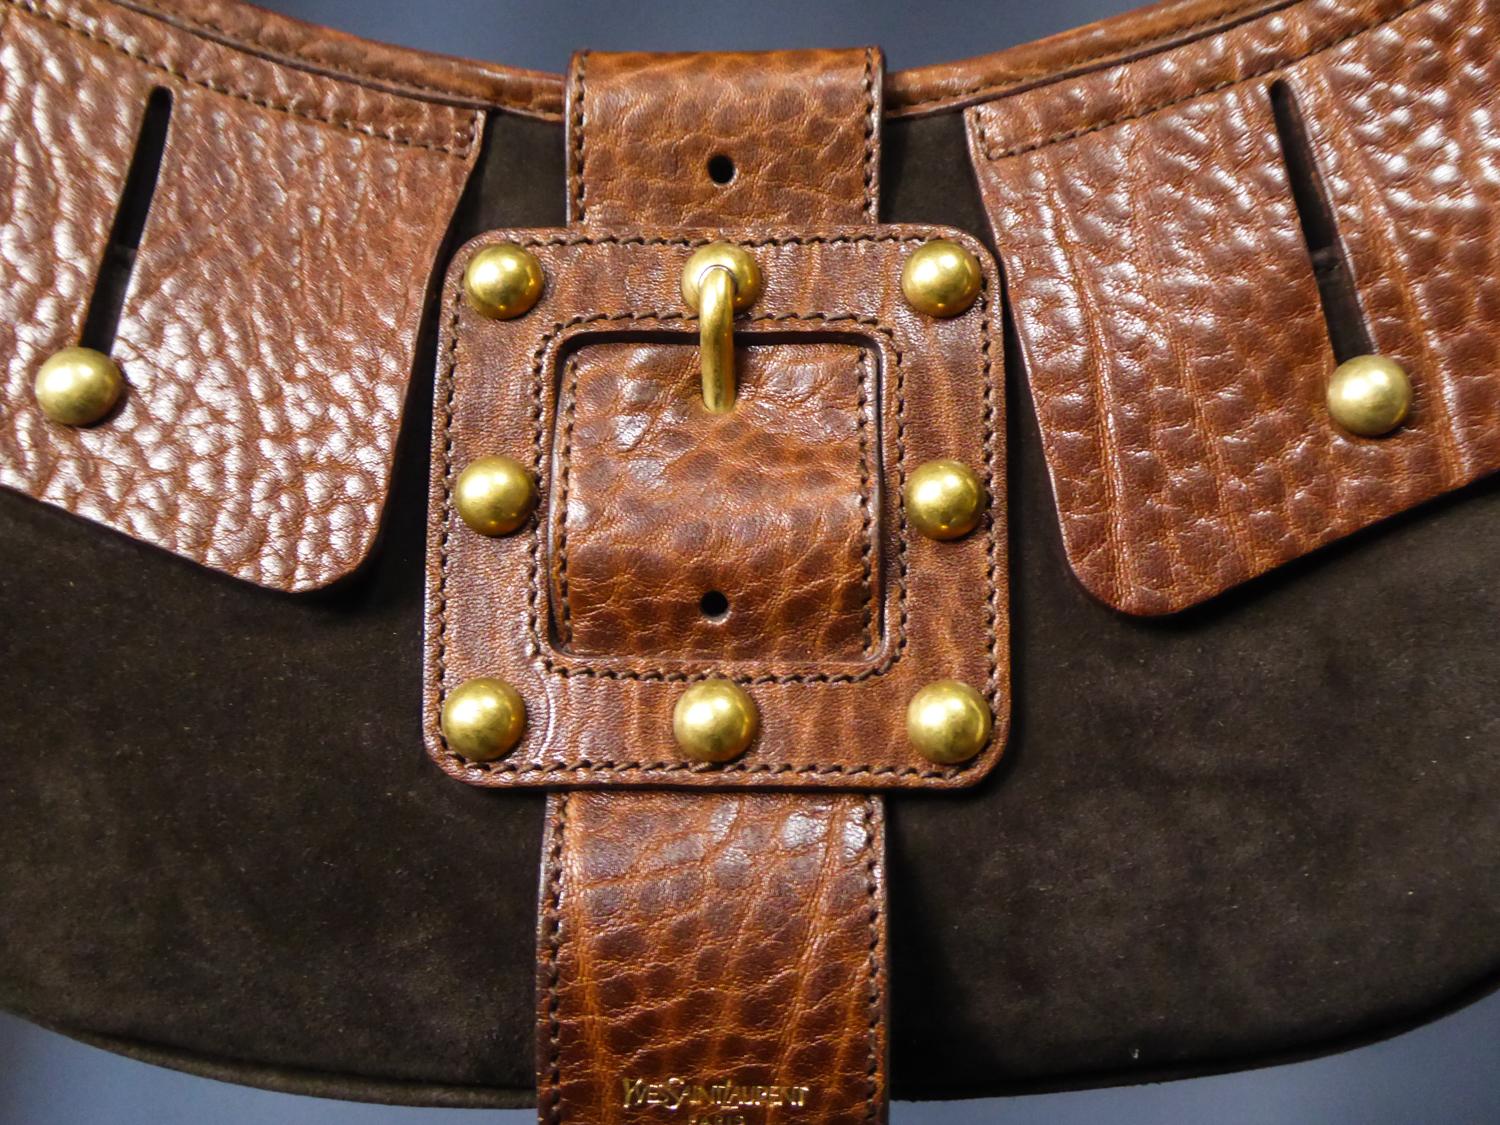 Circa 1990
France

Beautiful Saharienne bag in tawny leather and brown suede by  Yves Saint Laurent Rive gauche dating from 1995. Flap tabs and fake buckle studded with brass balls. Small strap with brass rings and  interior in brown satin with